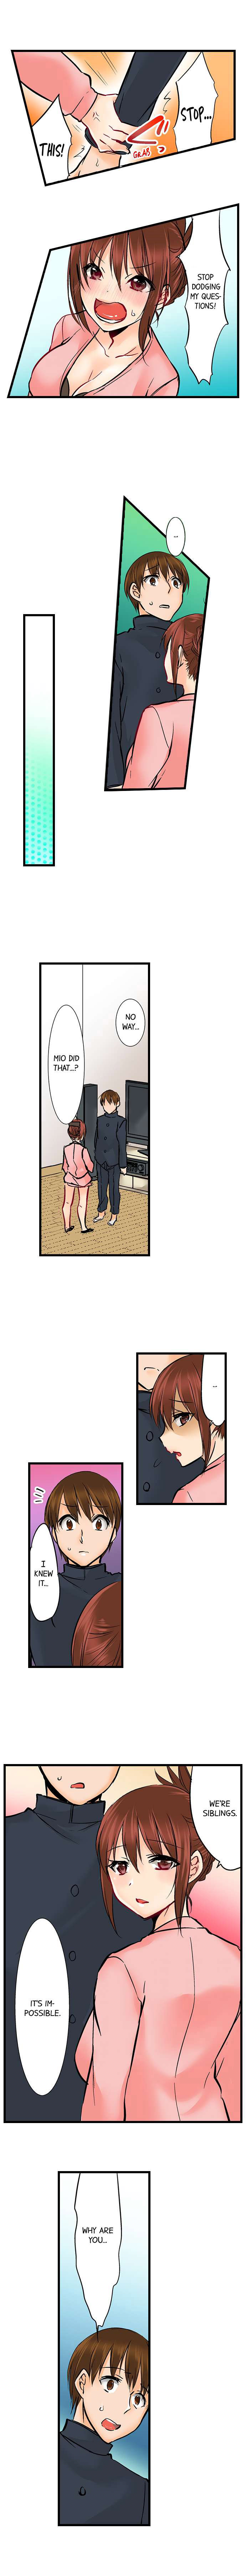 Touching My Older Sister Under the Table - Chapter 36 Page 2